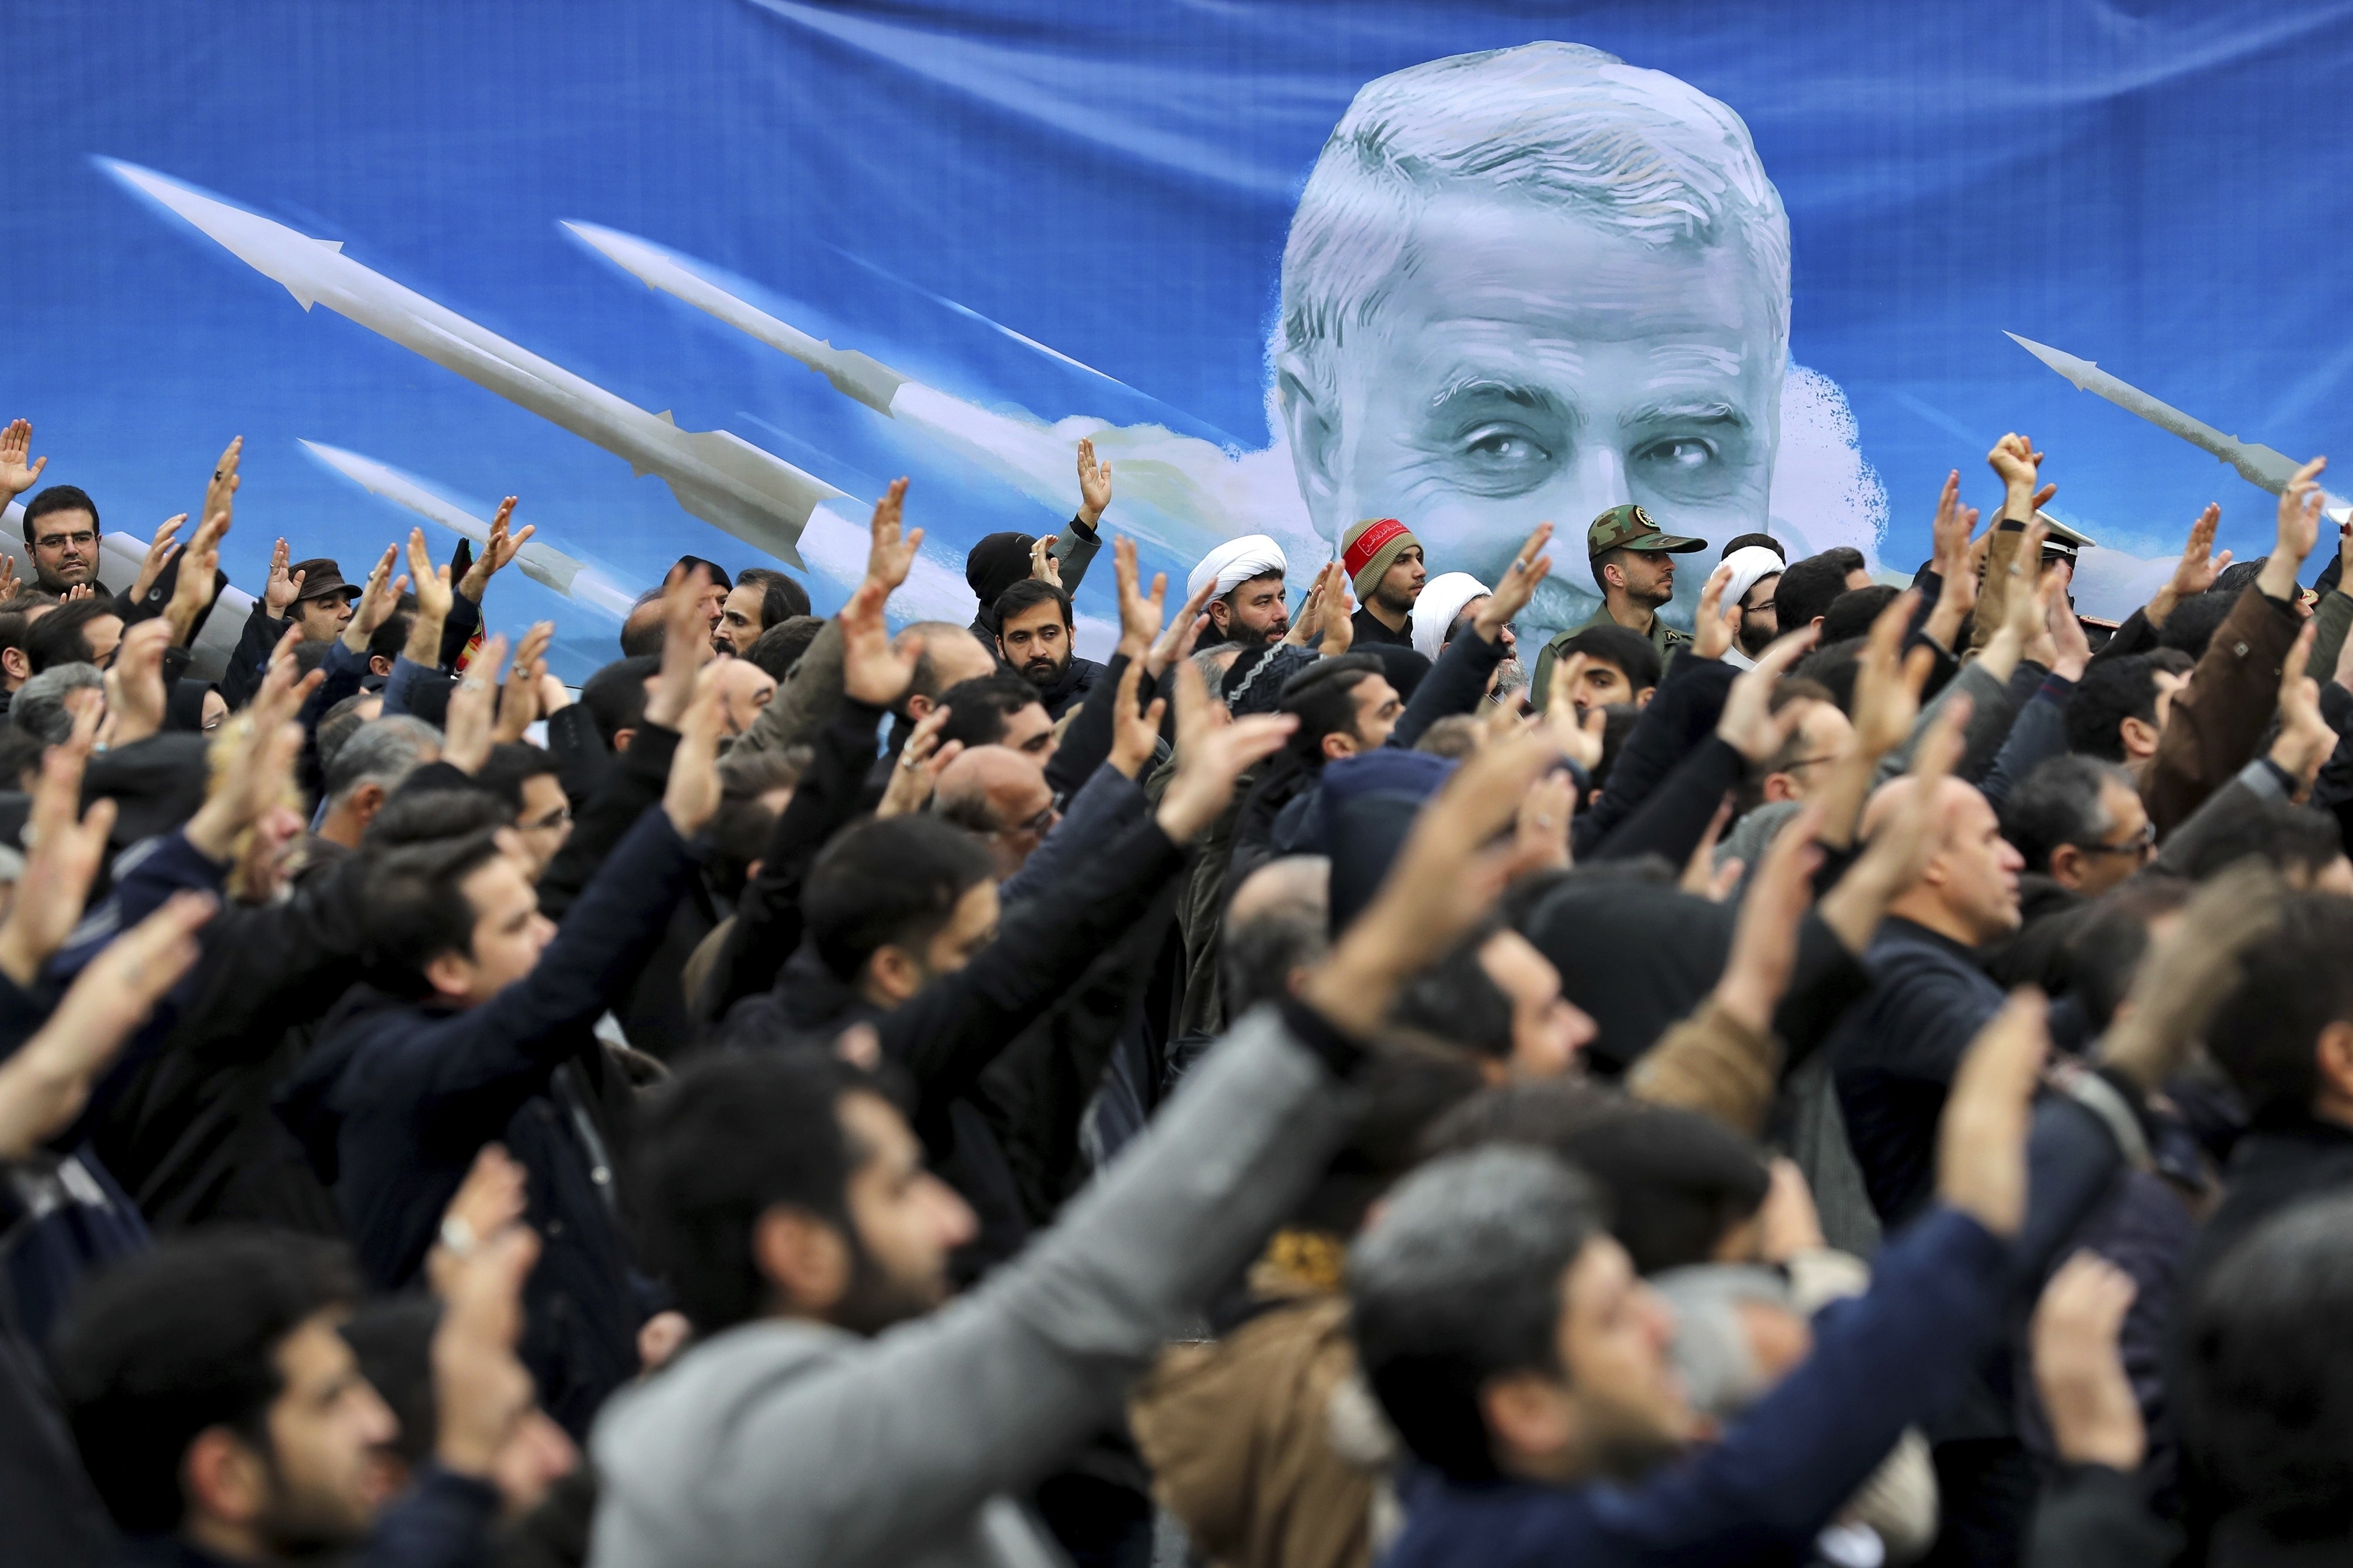 Protesters in Iran demonstrate over the US air strike in Iraq that killed the Iranian Major-General Qassem Soleimani. Photo: AP